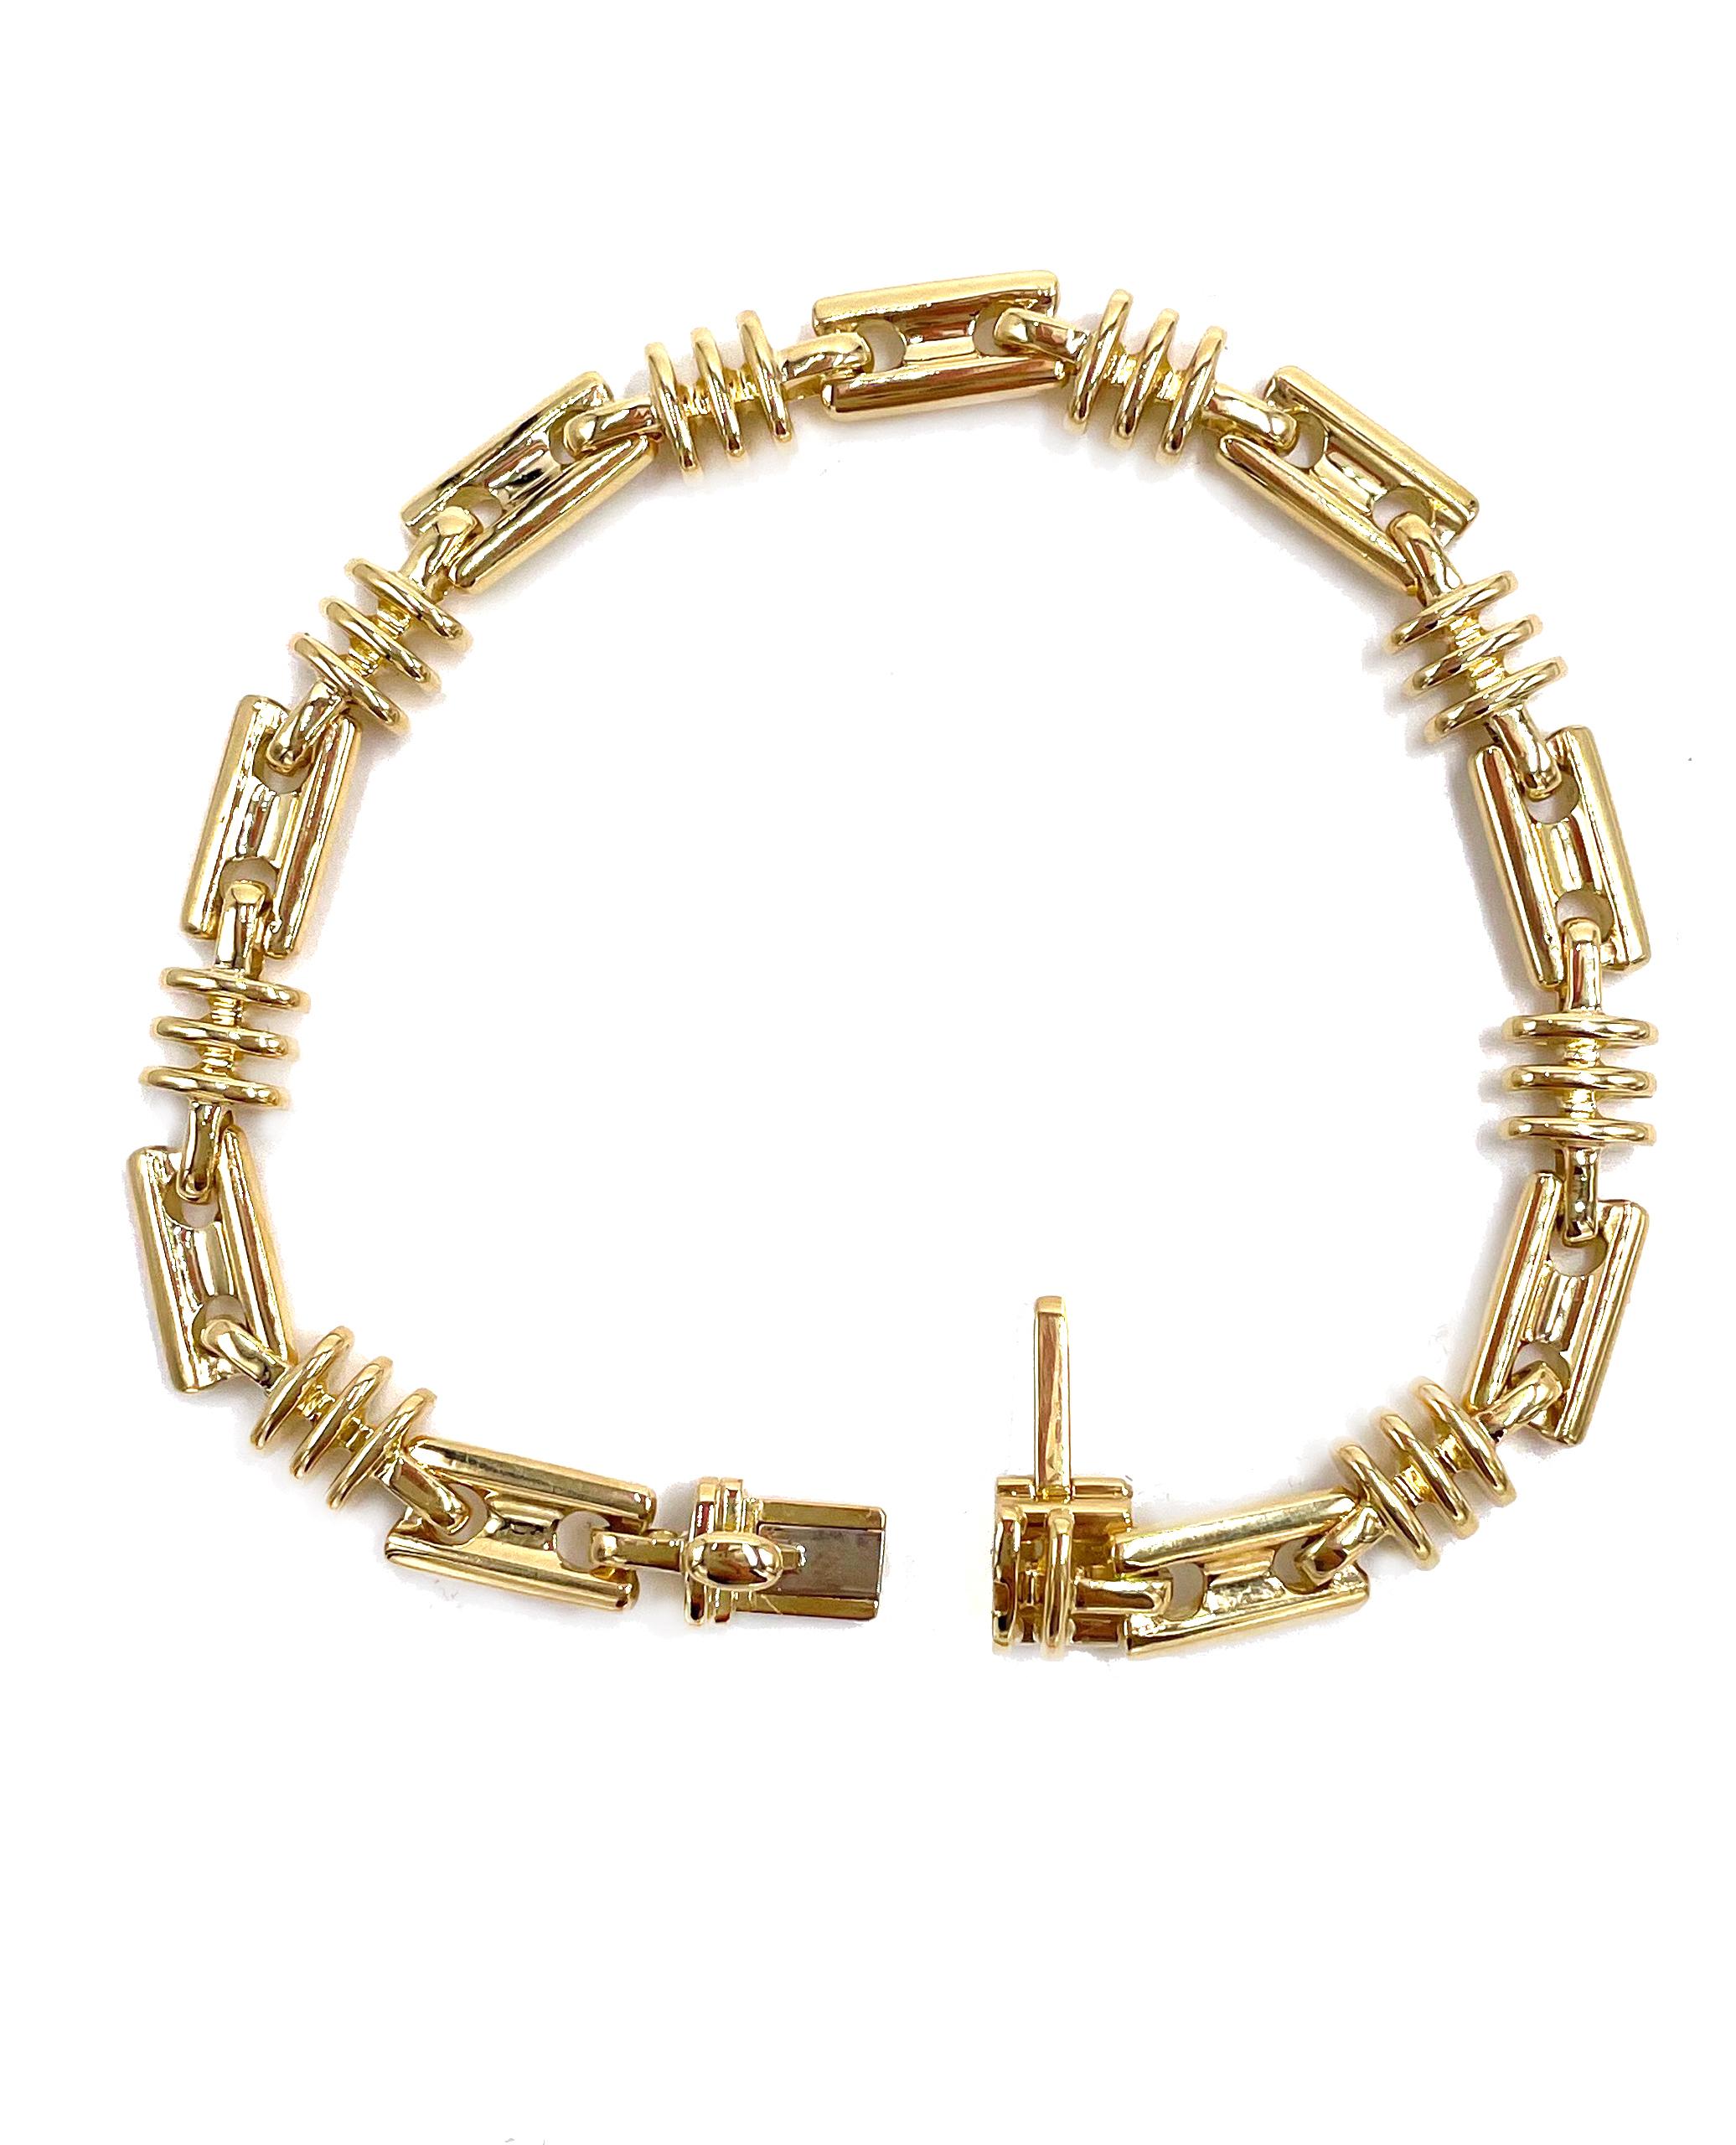 18K yellow gold solid men's bracelet with custom handmade lock and hidden safety lock. 

* 43.9 grams total weight.
* 8.75 inches long. Can be shortened.